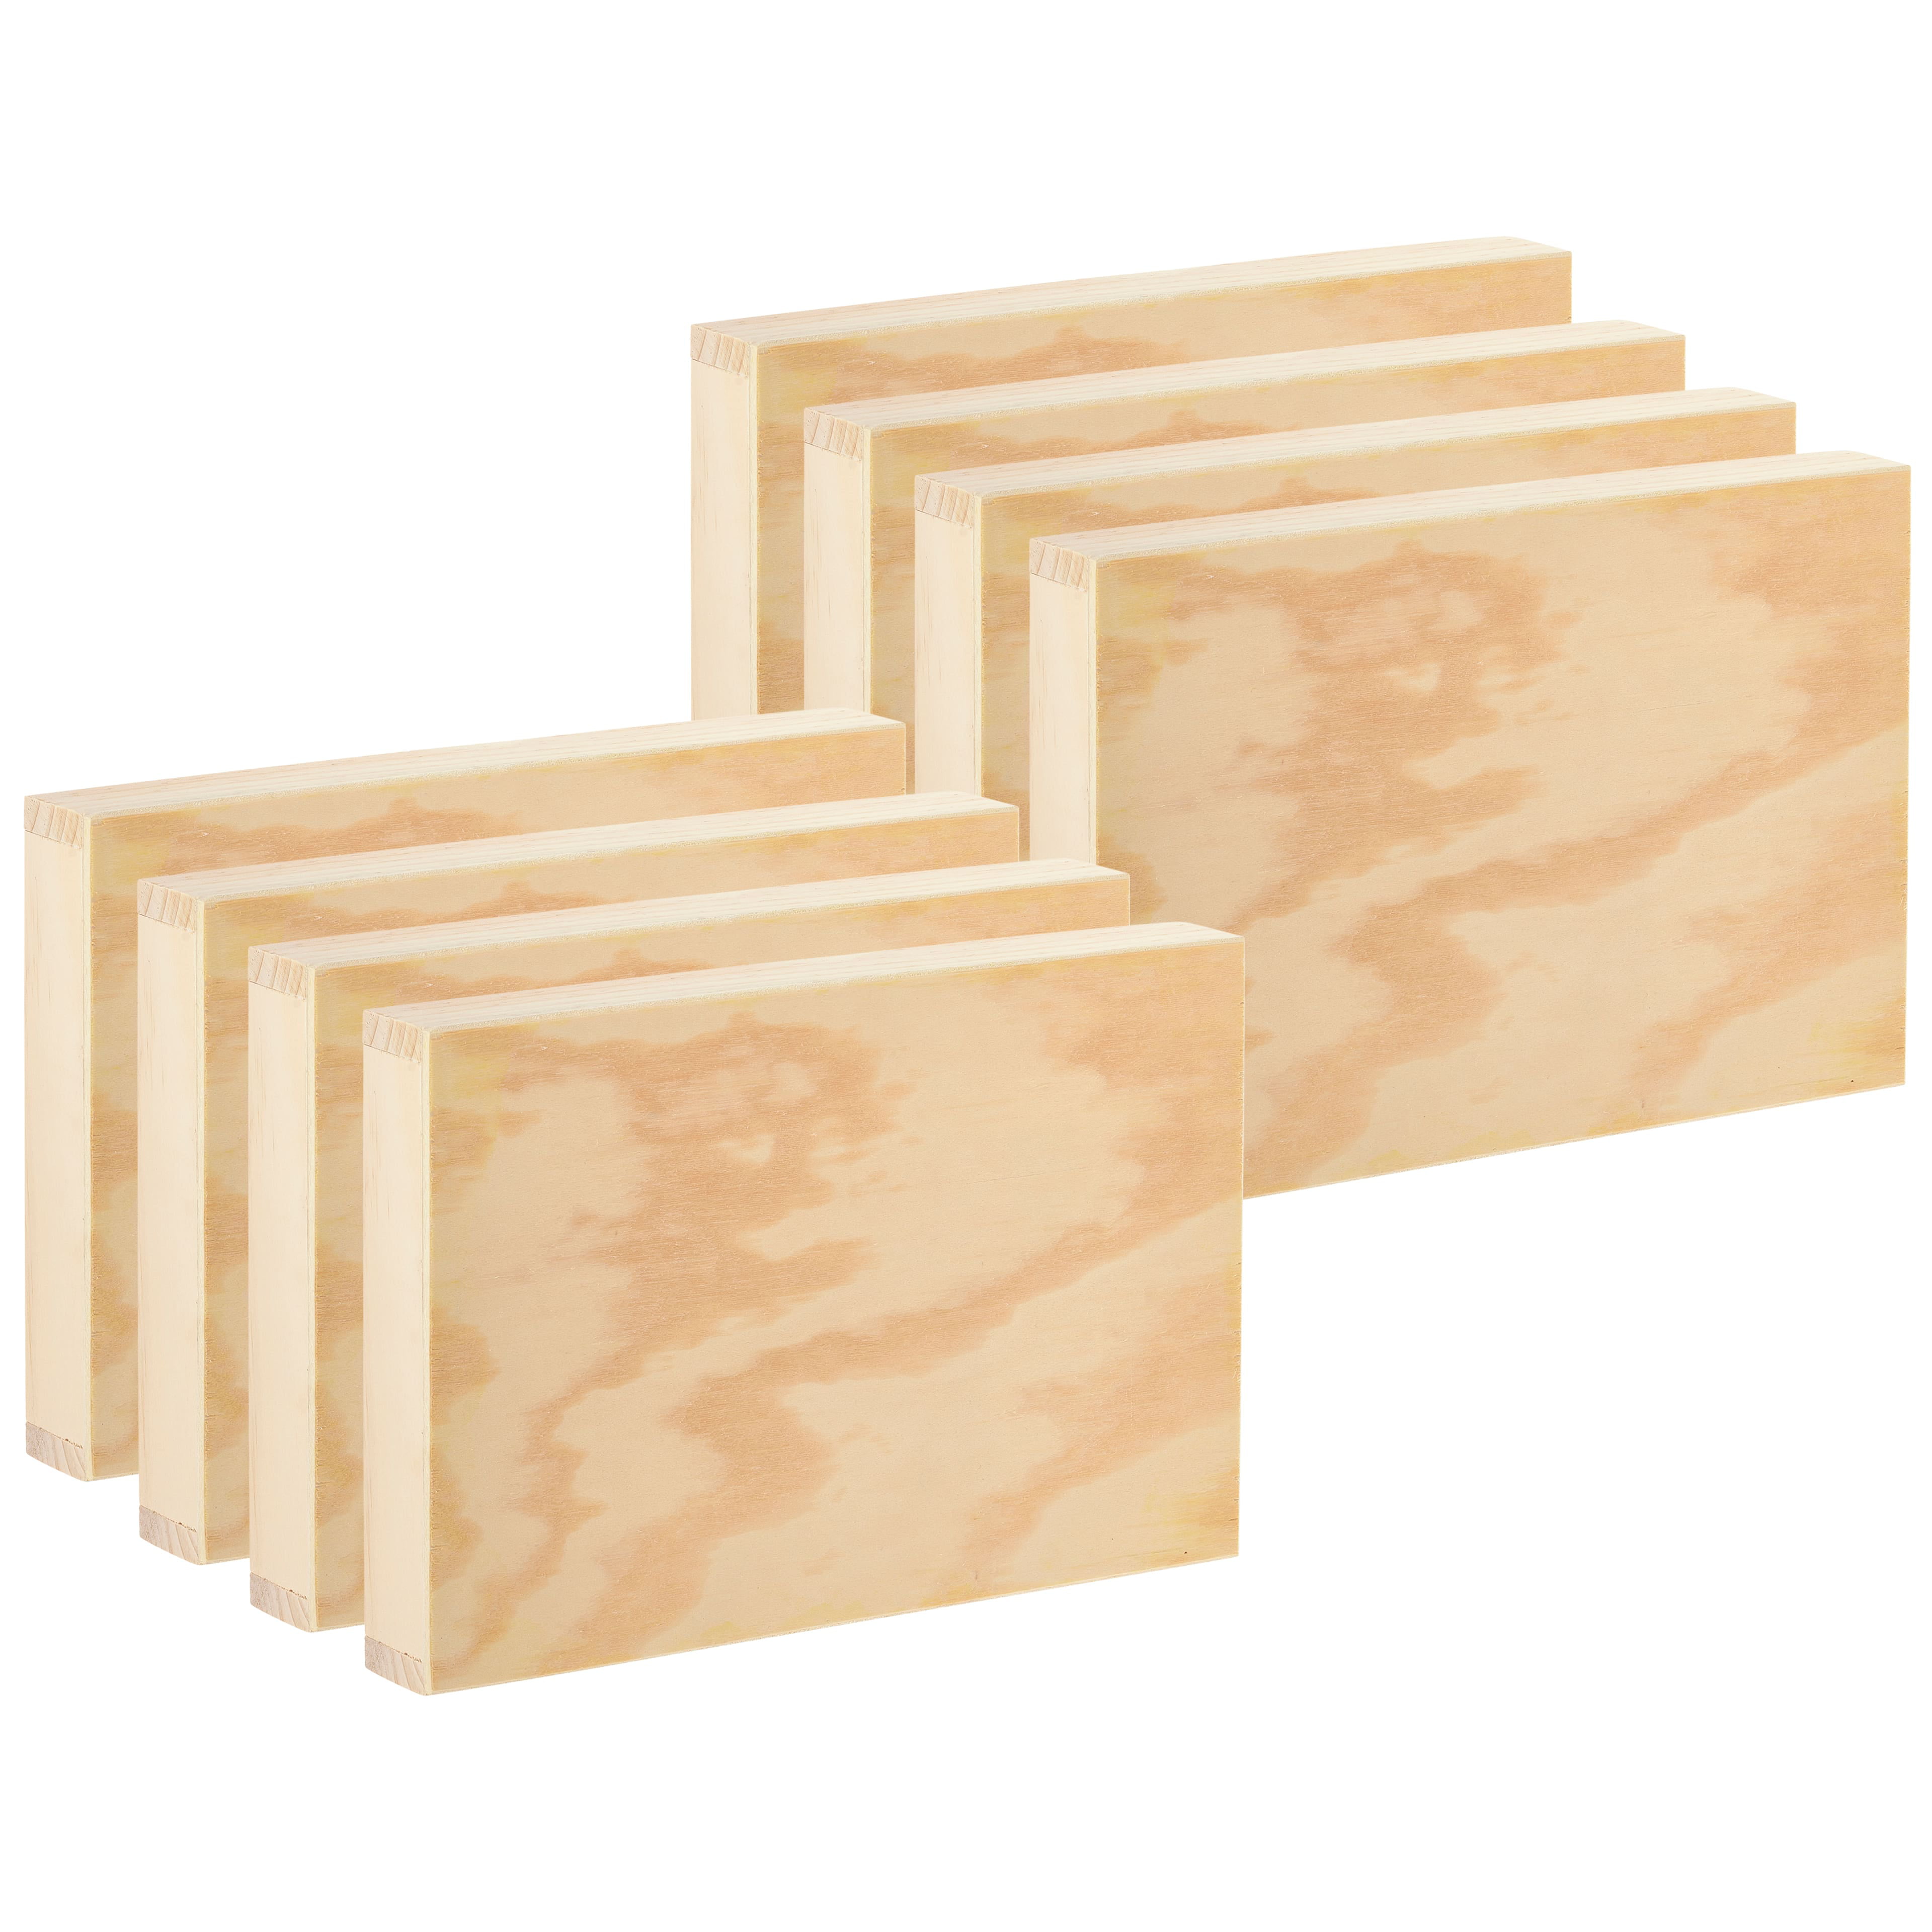 8 Pack: 9 x 6 Wood Plaque by Make Market®